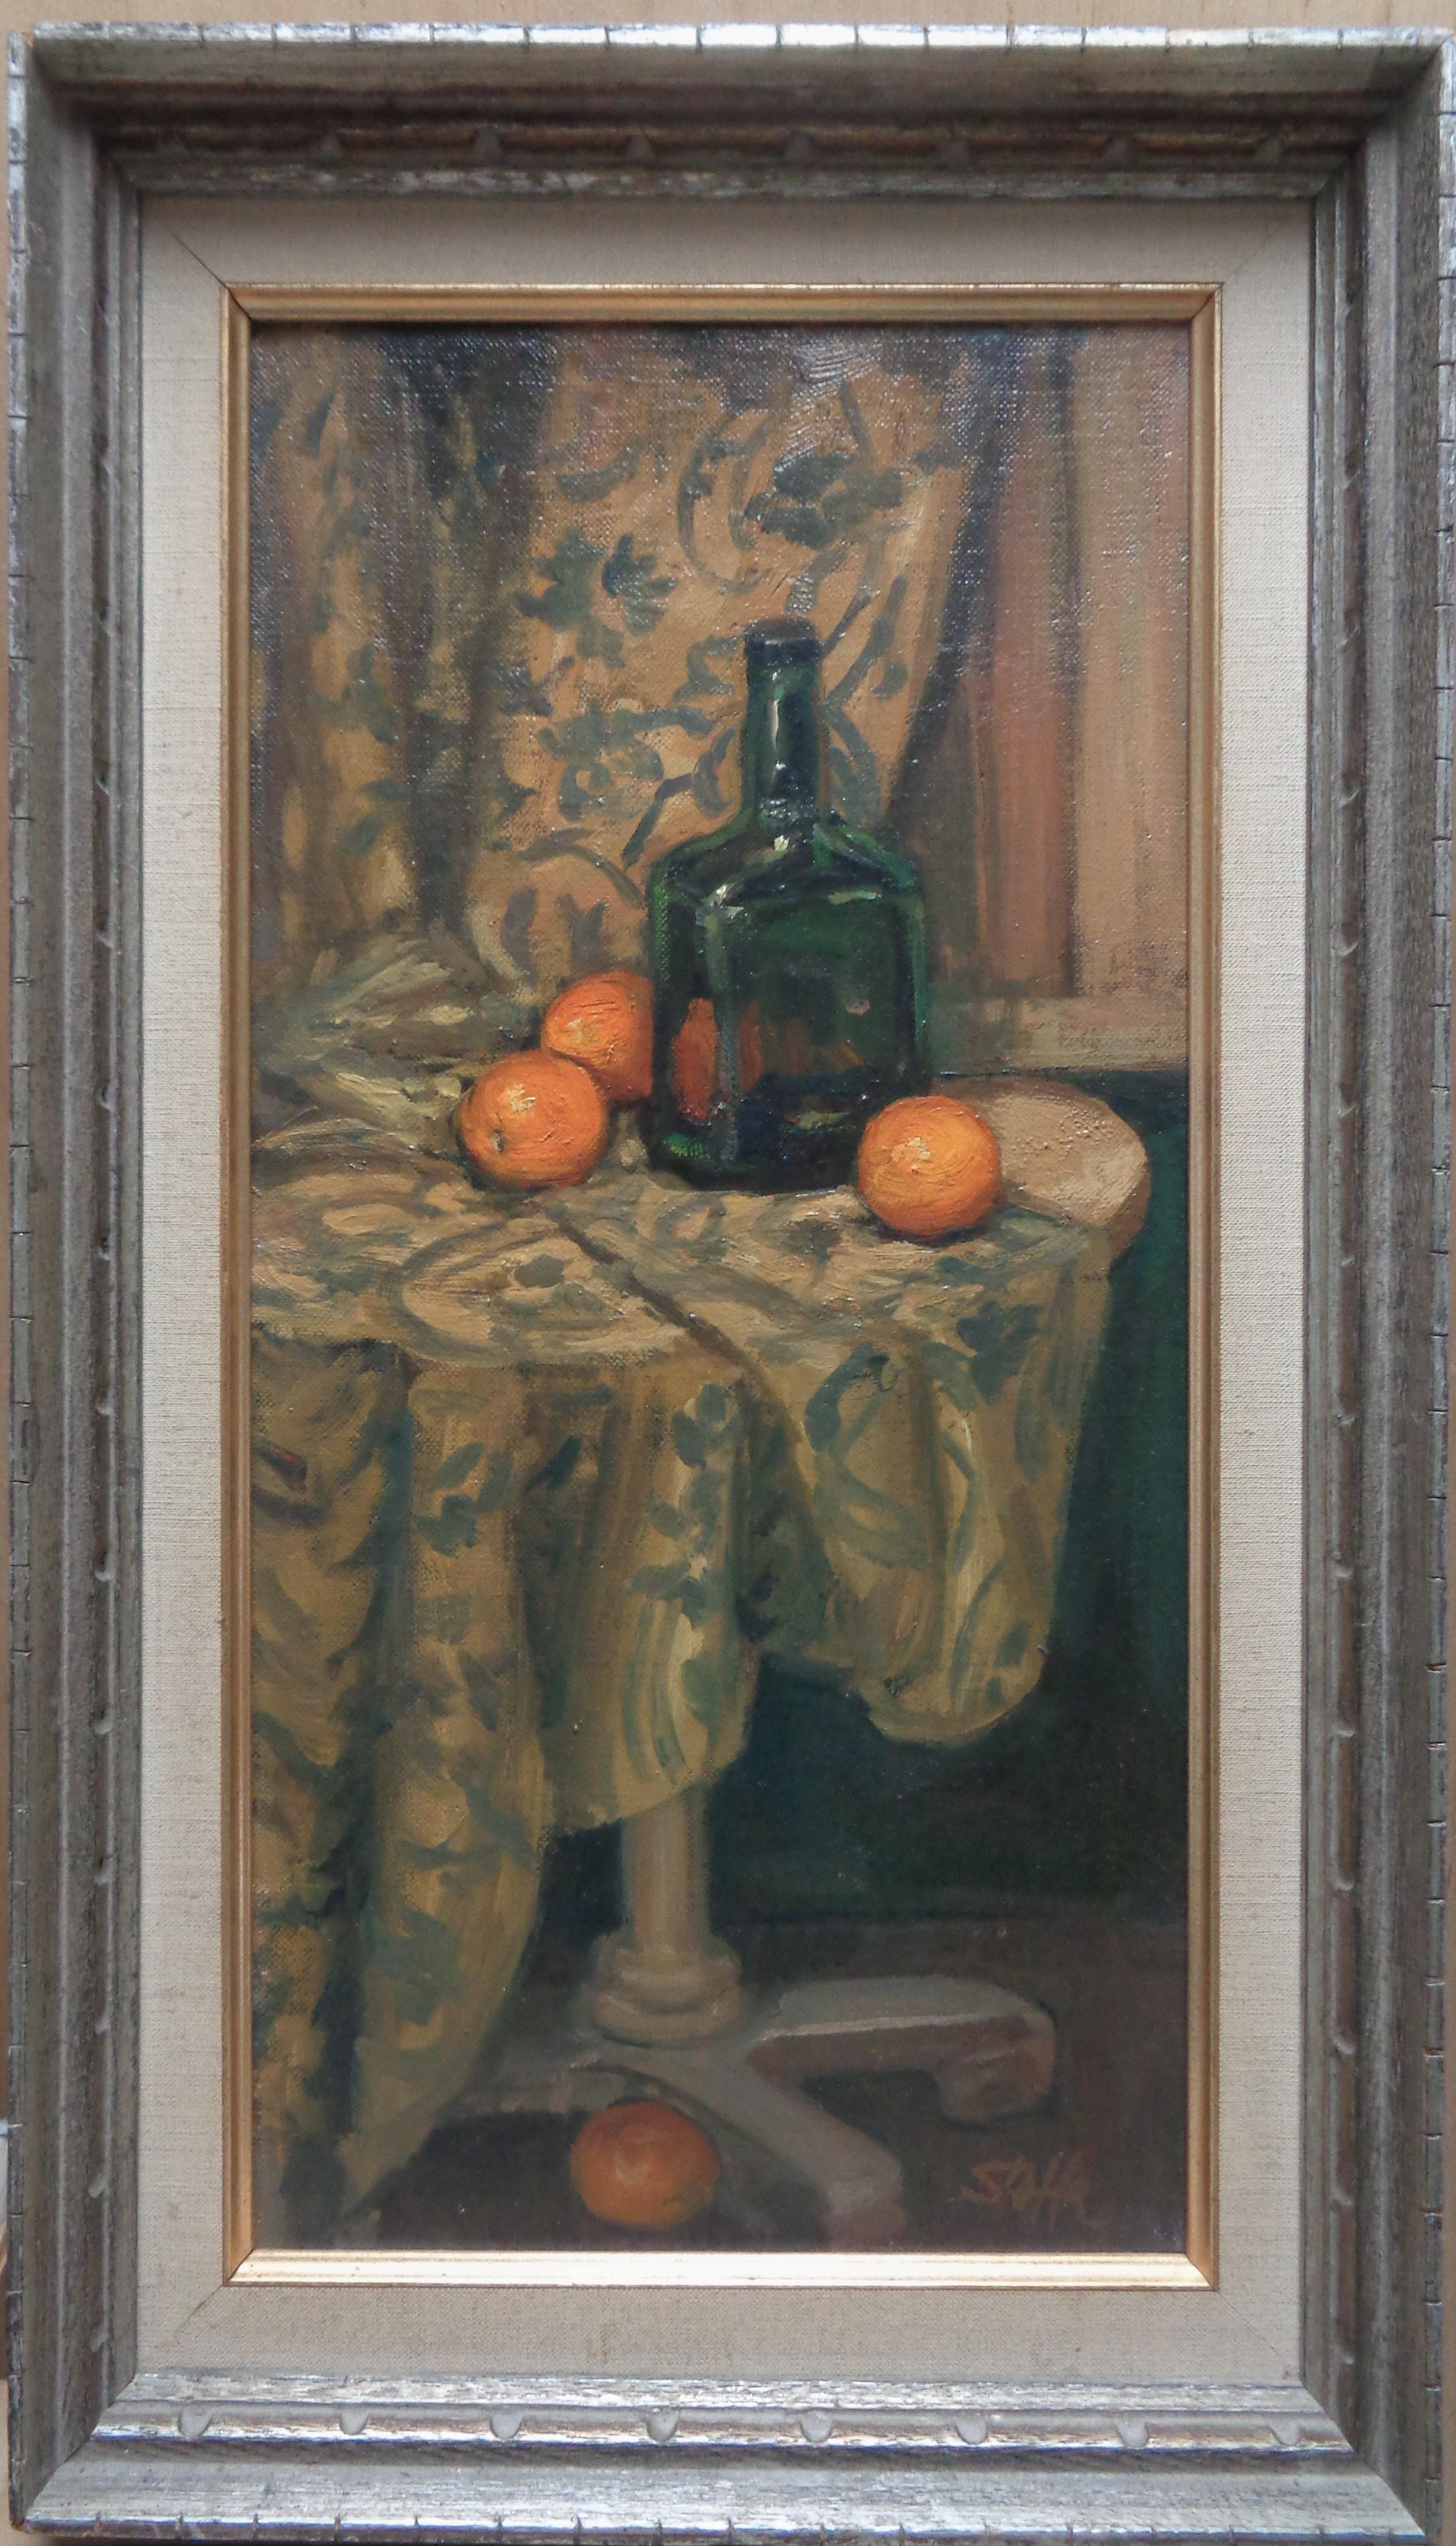 Michael Stoffa (American,1923-2001)  (Rockport, MA)
"Still LIfe with Oranges"
Oil on Panel, signed lower right
Painting:  approximately 8” x 16”
The painting needs to be cleaned and is not as bright  and clear as the images indicate. Digital,